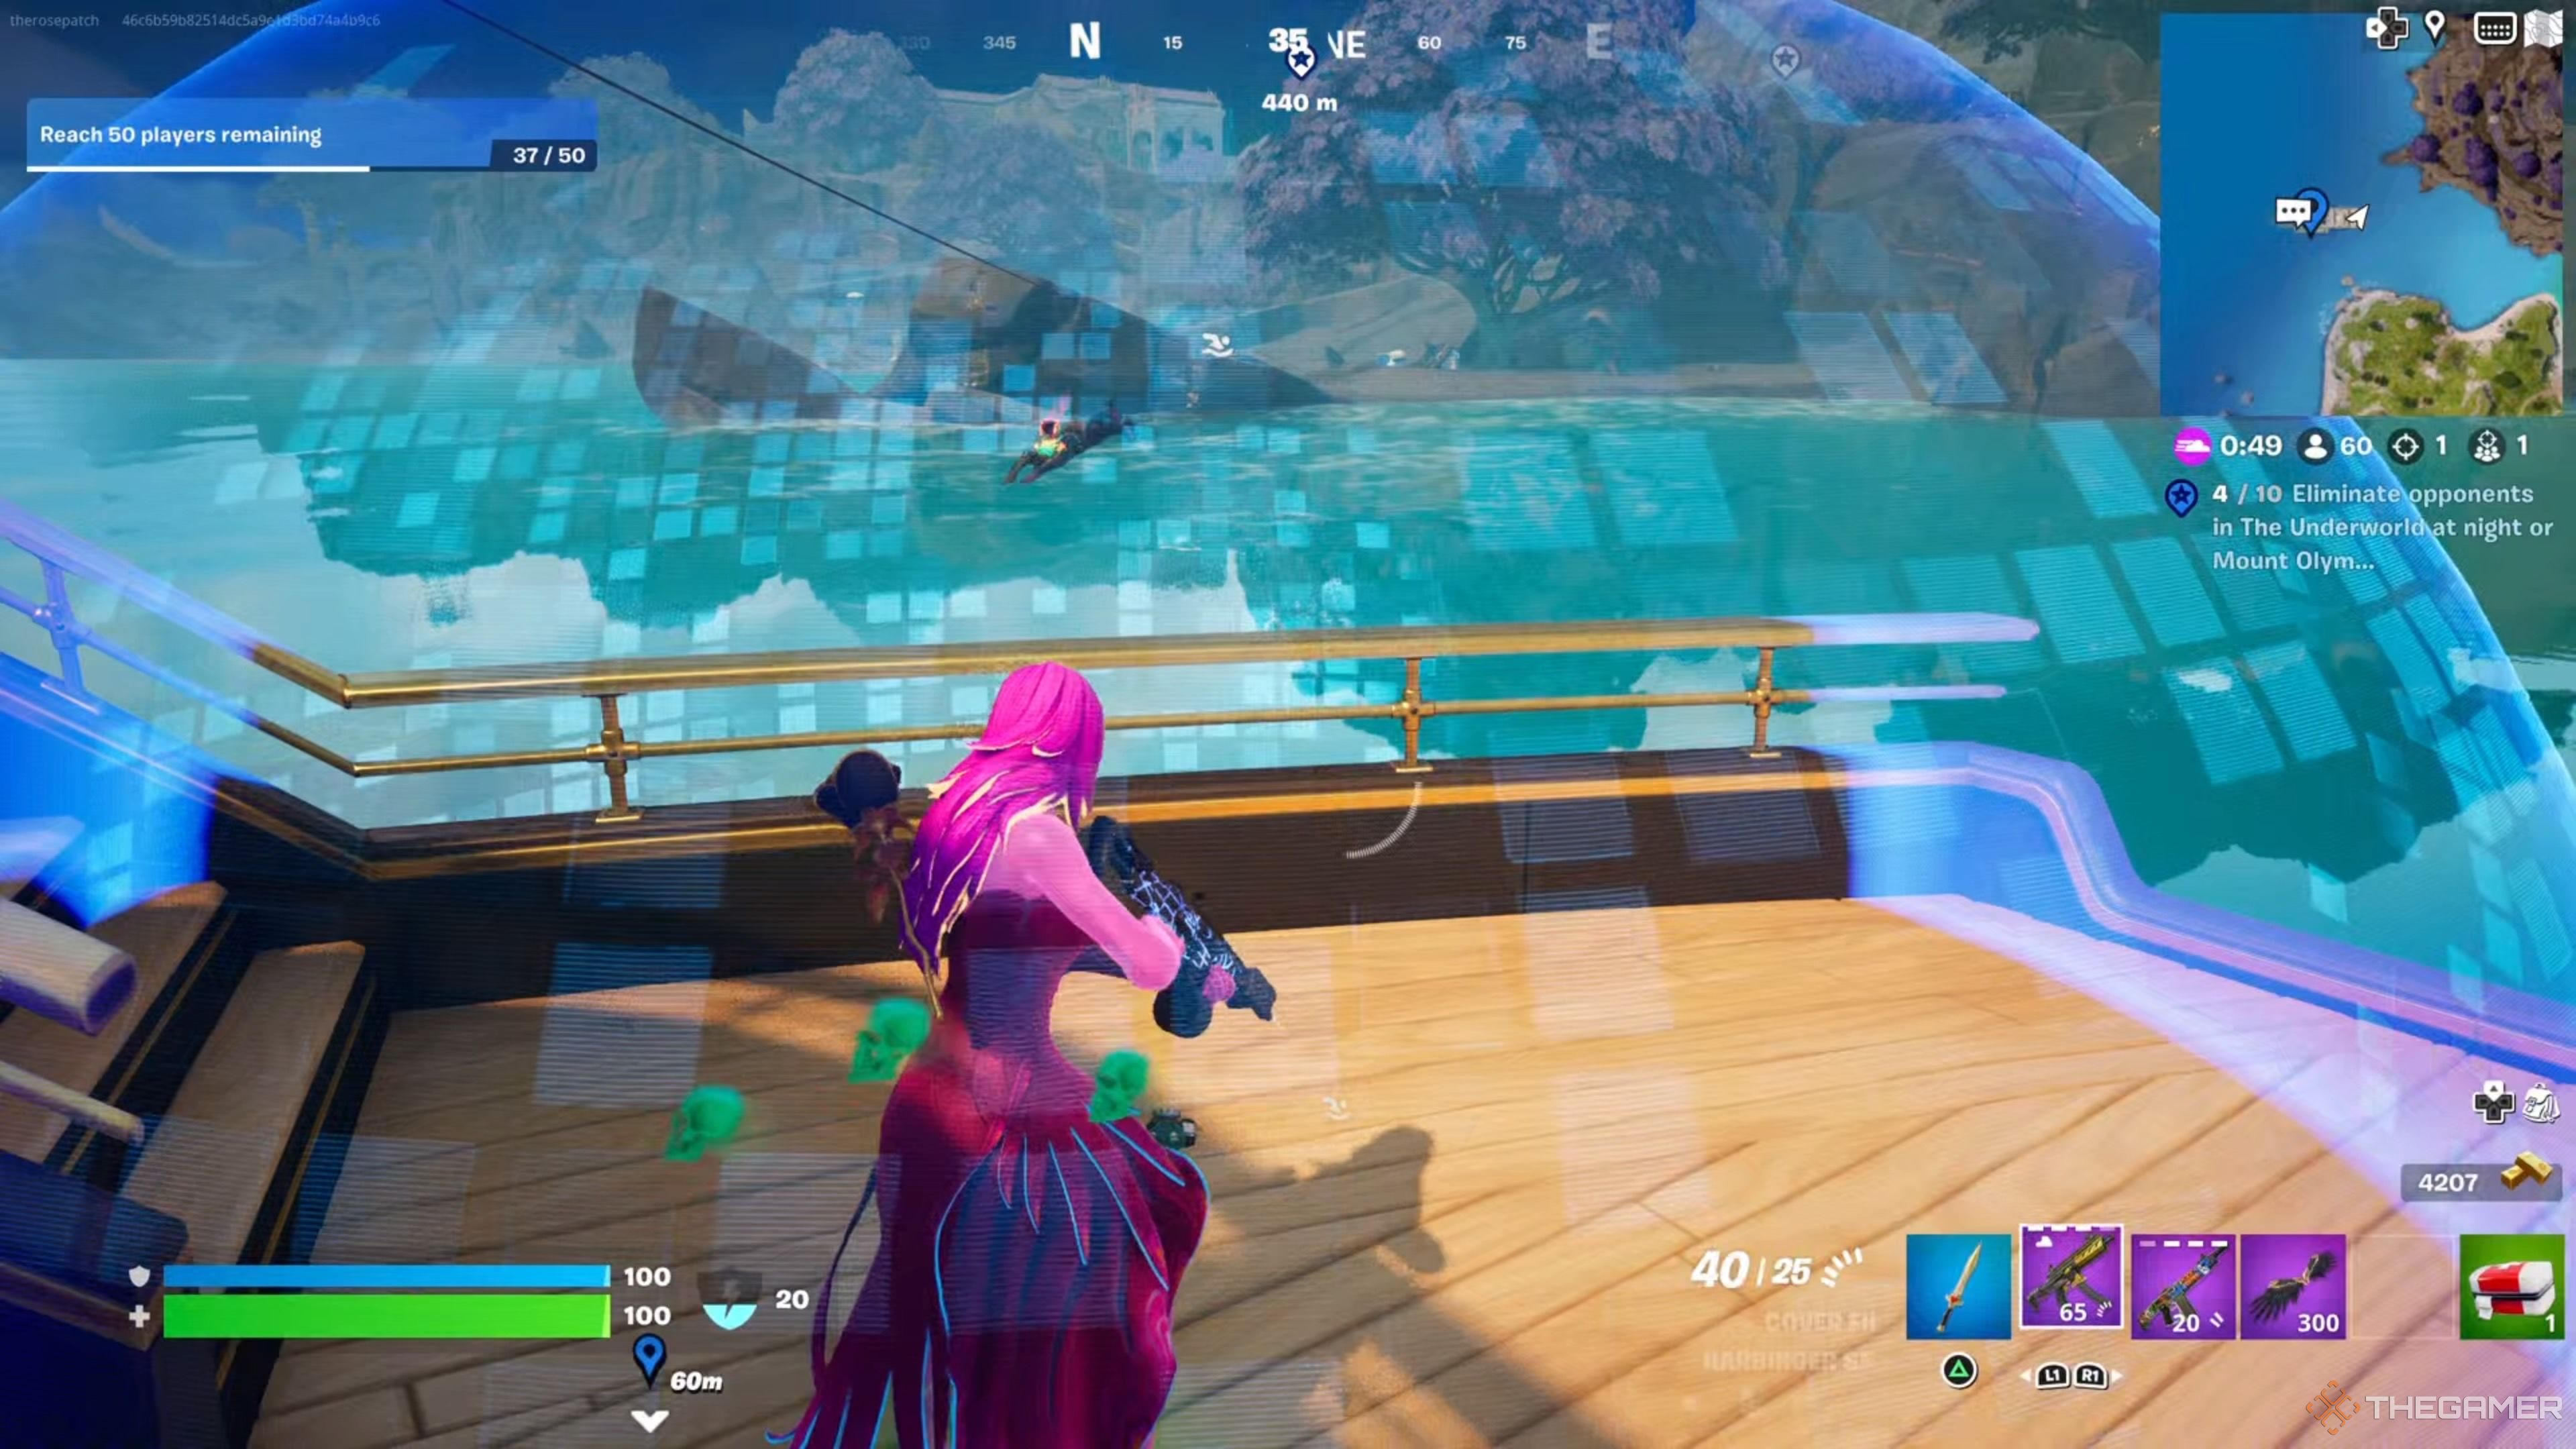 Using a shield bubble Jr in Fortnite Chapter 5 Season 2 for one of the Week 3 quests.